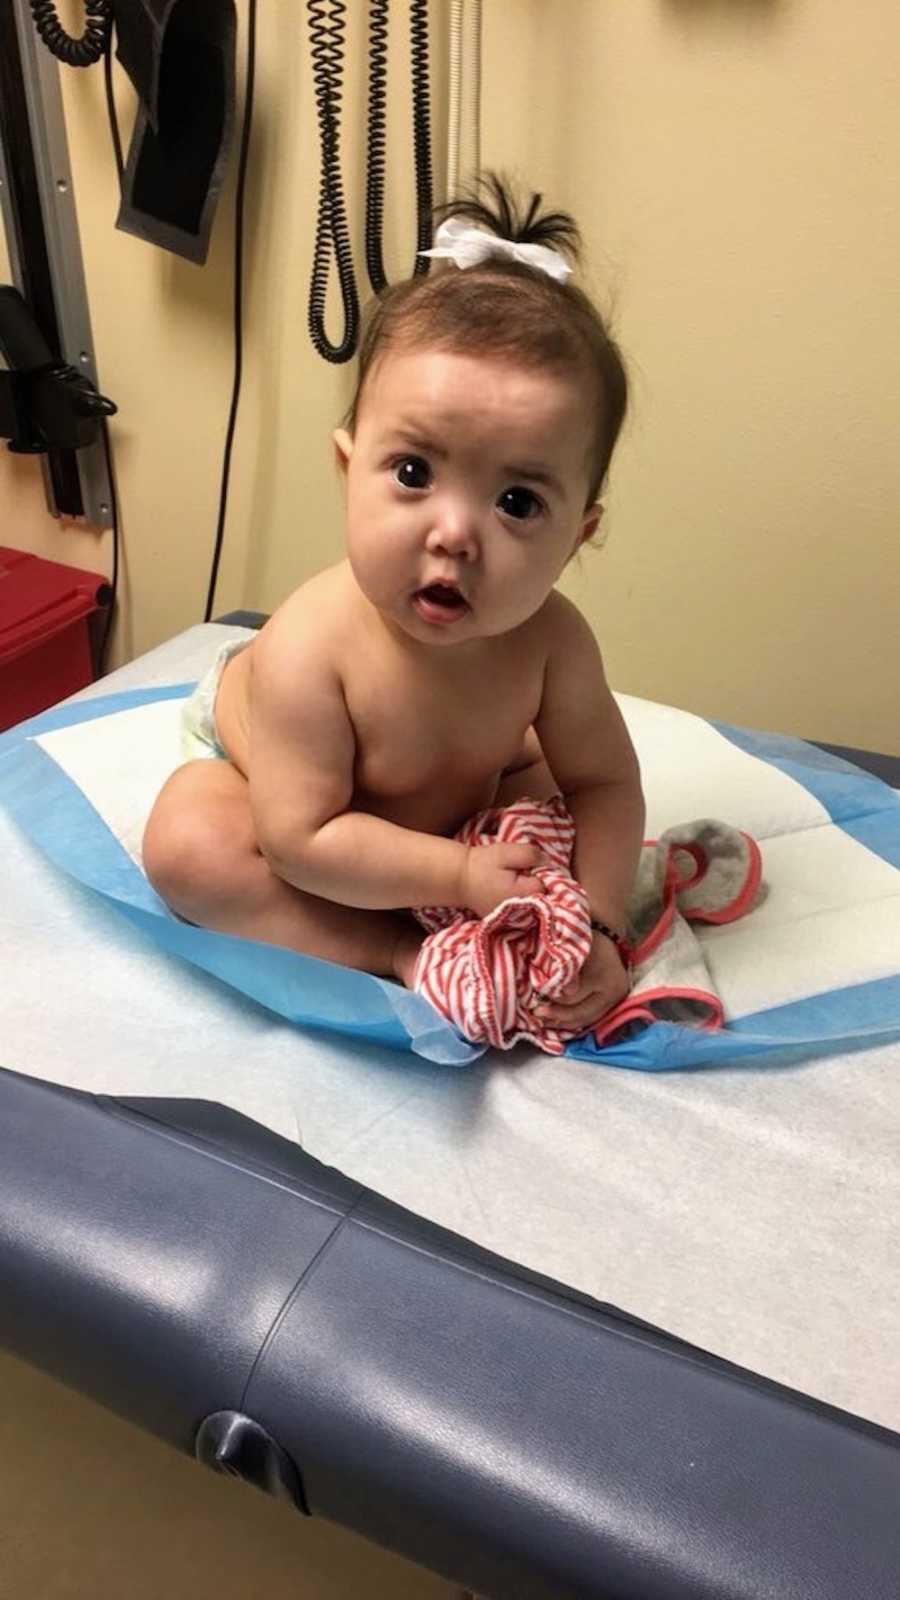 Infant with Axenfeld-Rieger syndrome sits on doctor's office bed with just a diaper on